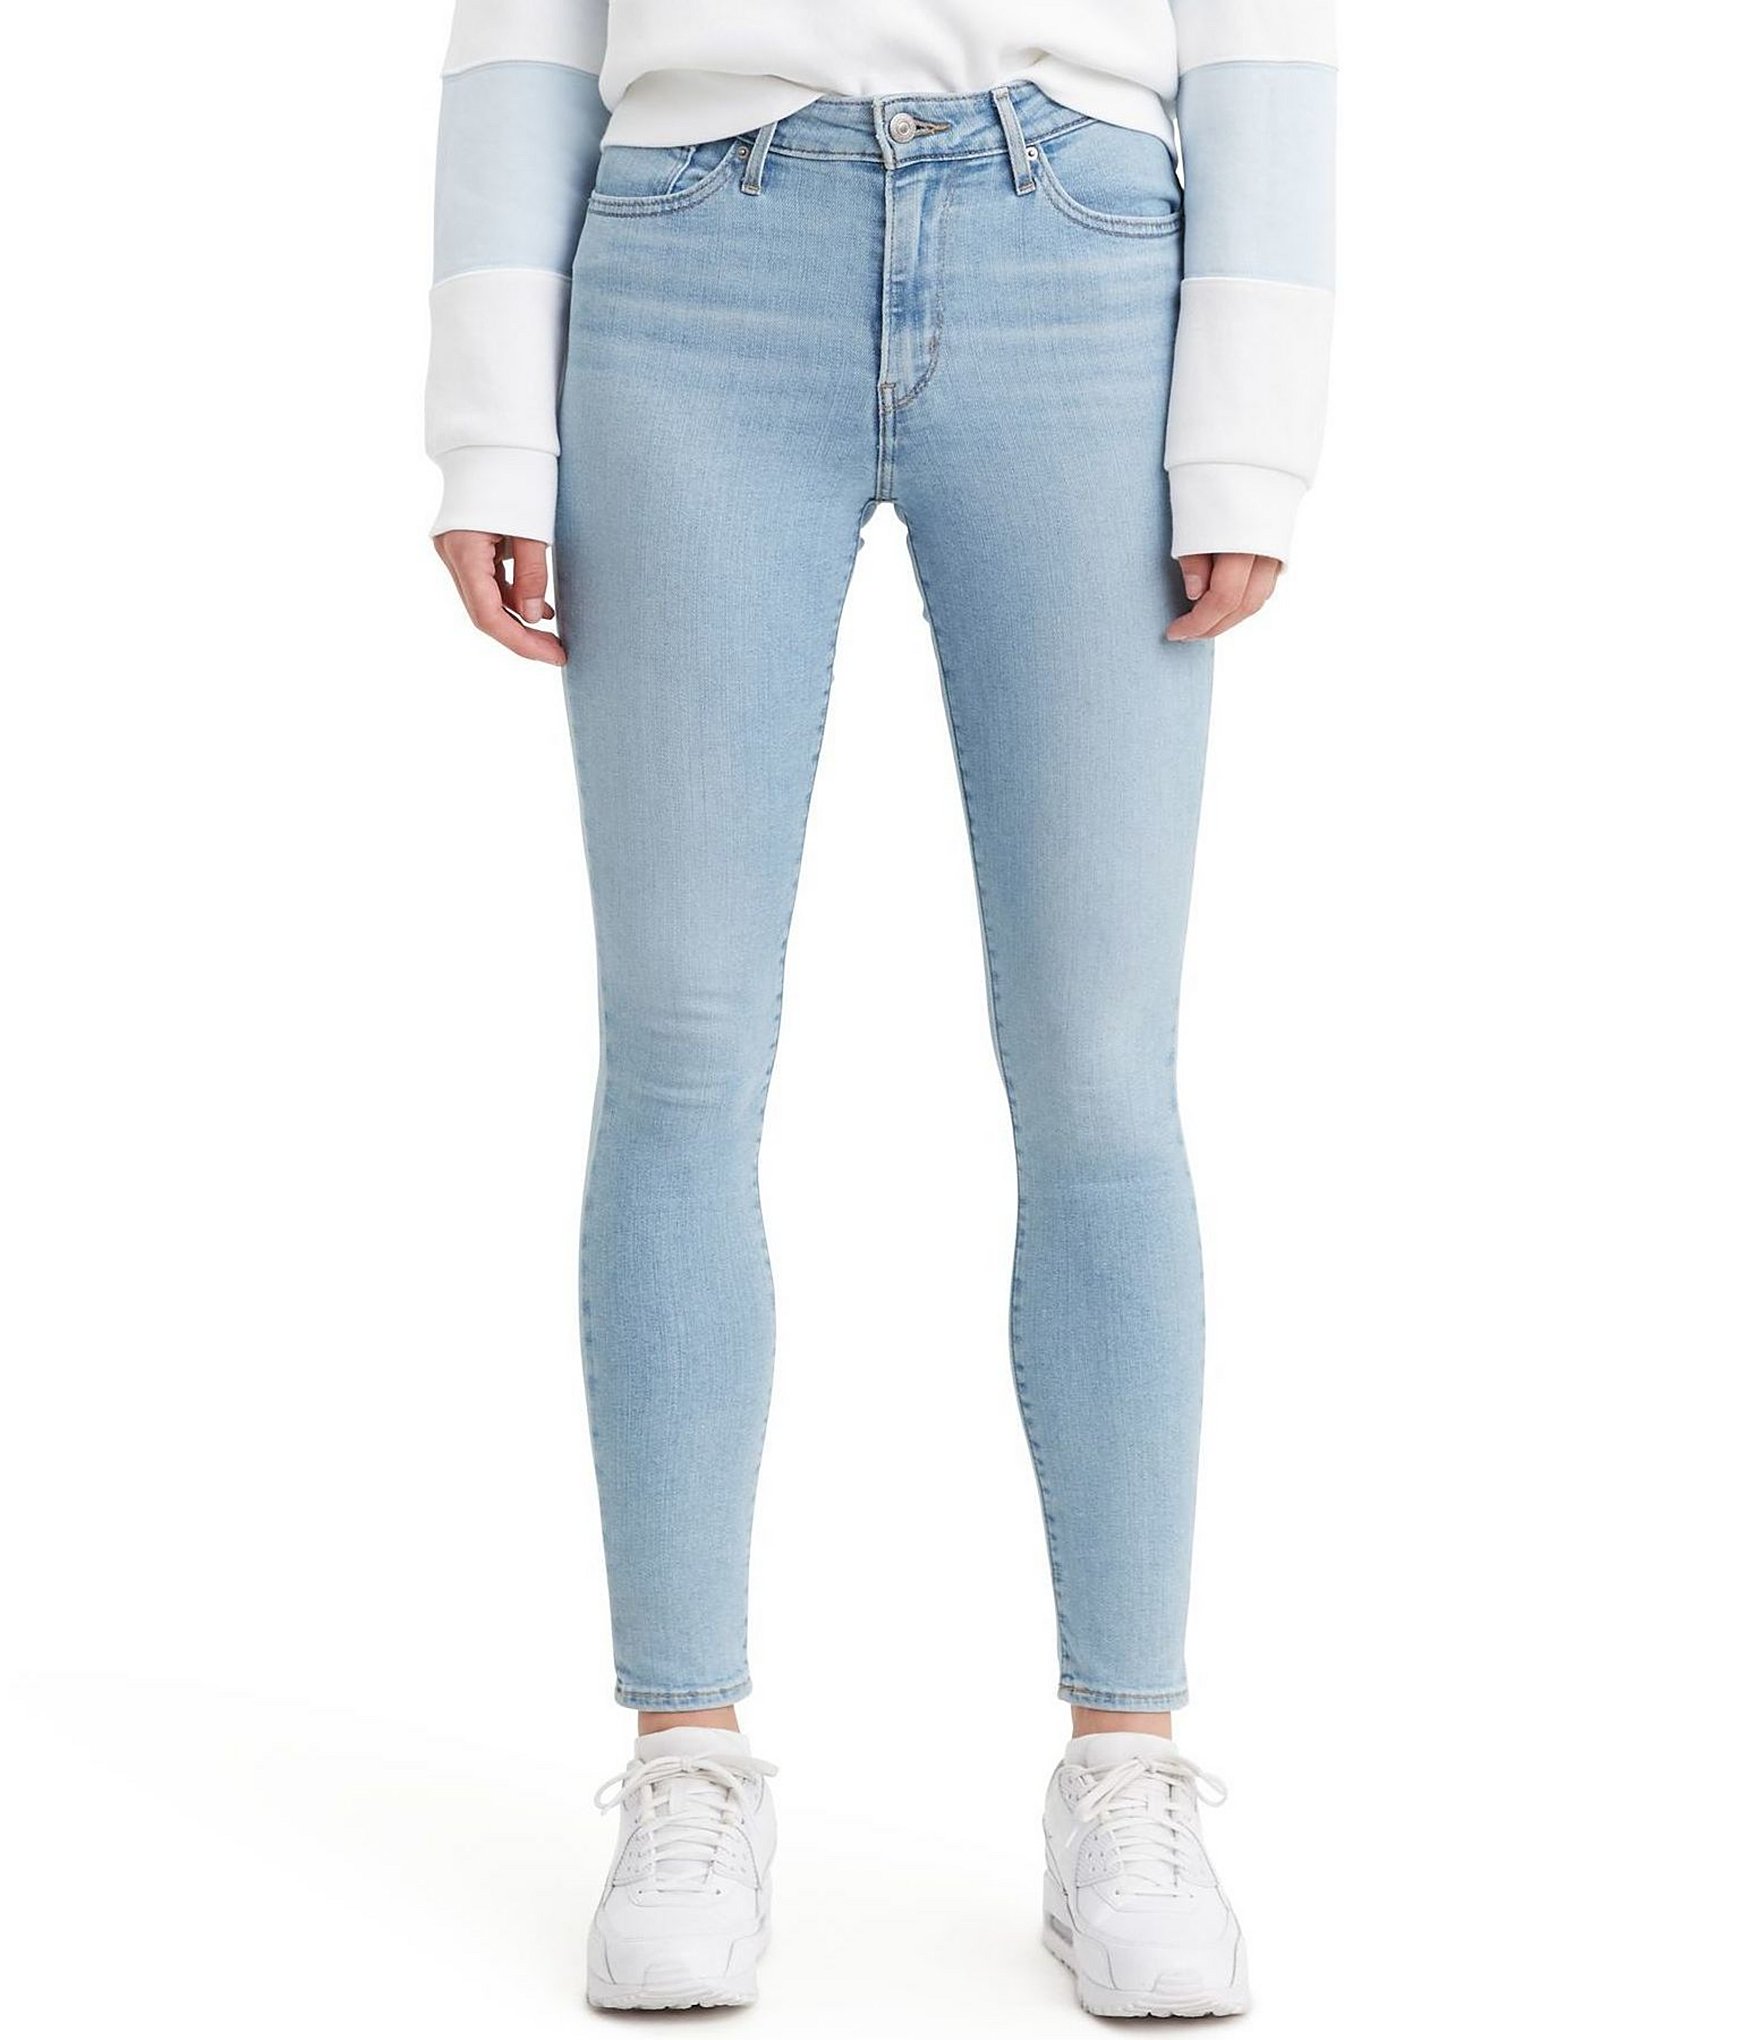 Levis High Waisted Skinny Jeans Online, SAVE 56% 